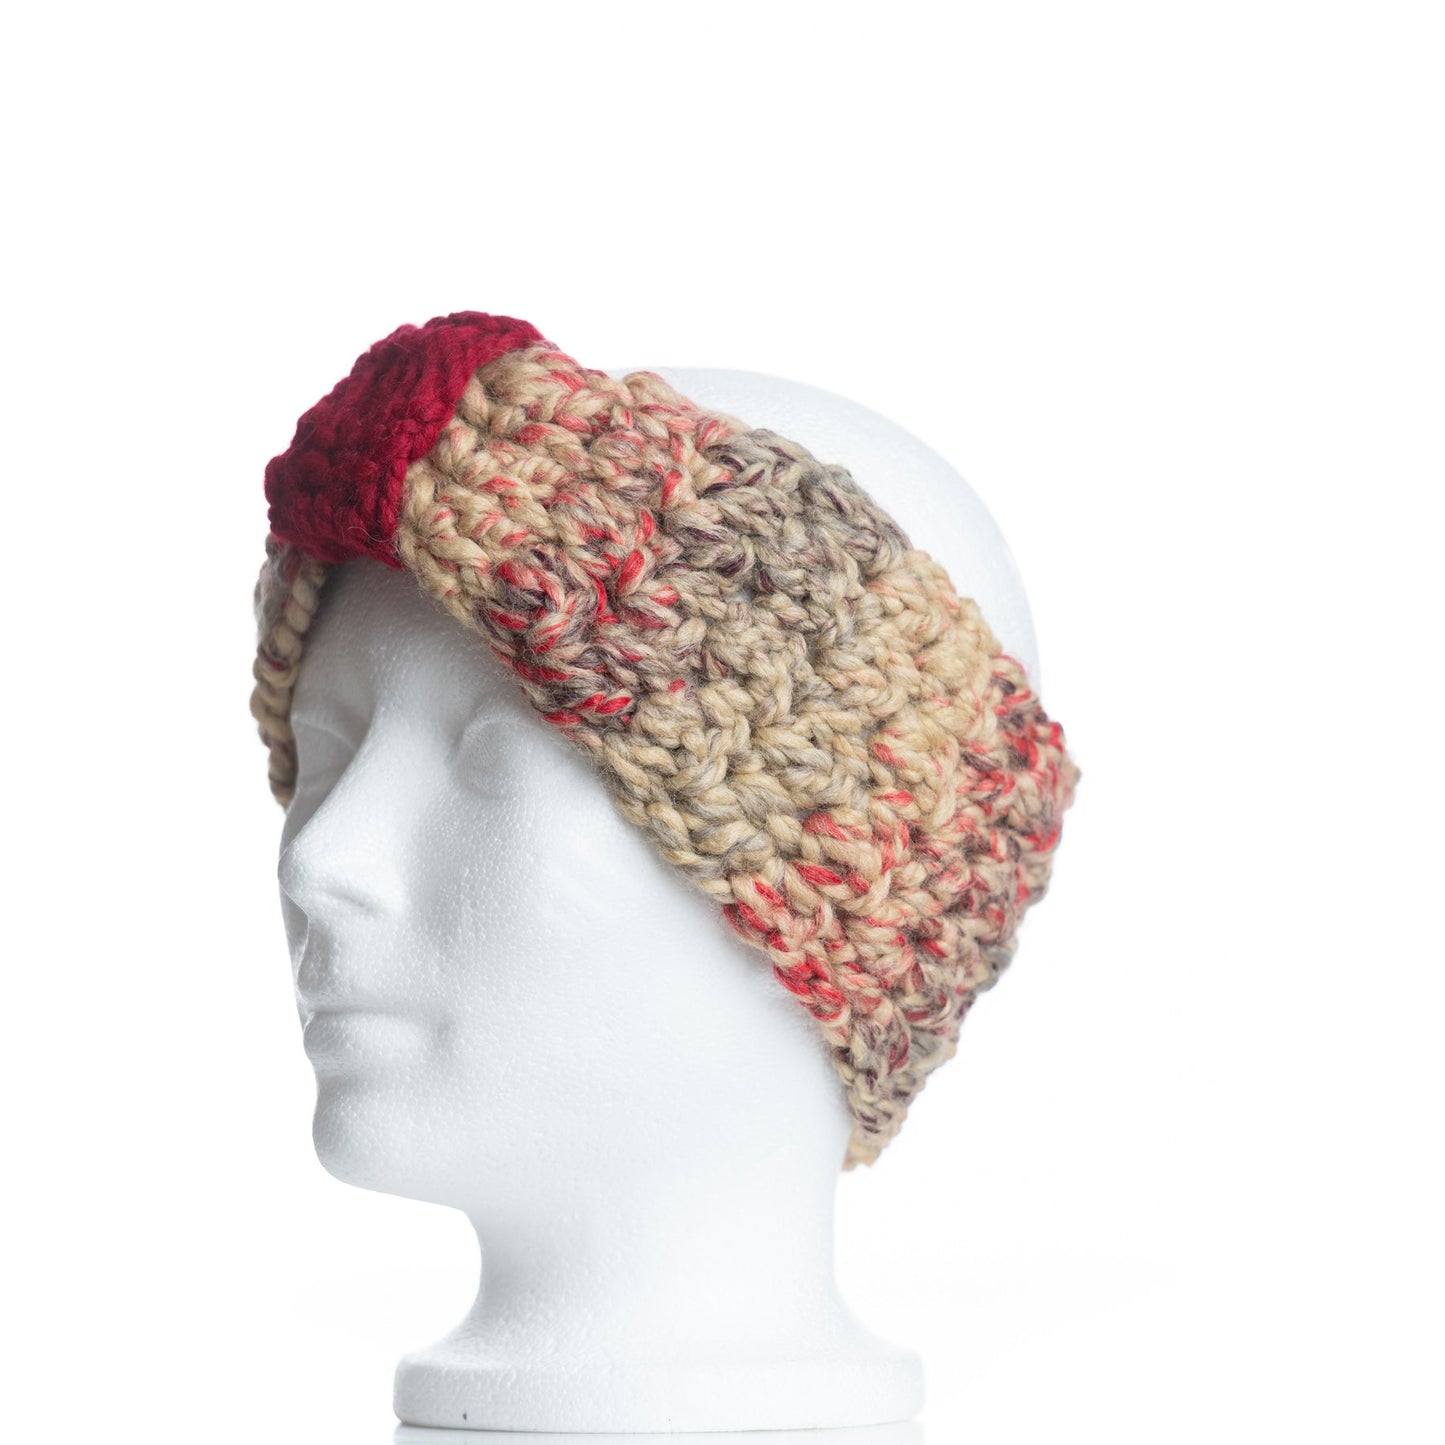 Knotty Headband in Jam Cookie with Cranberry Accent